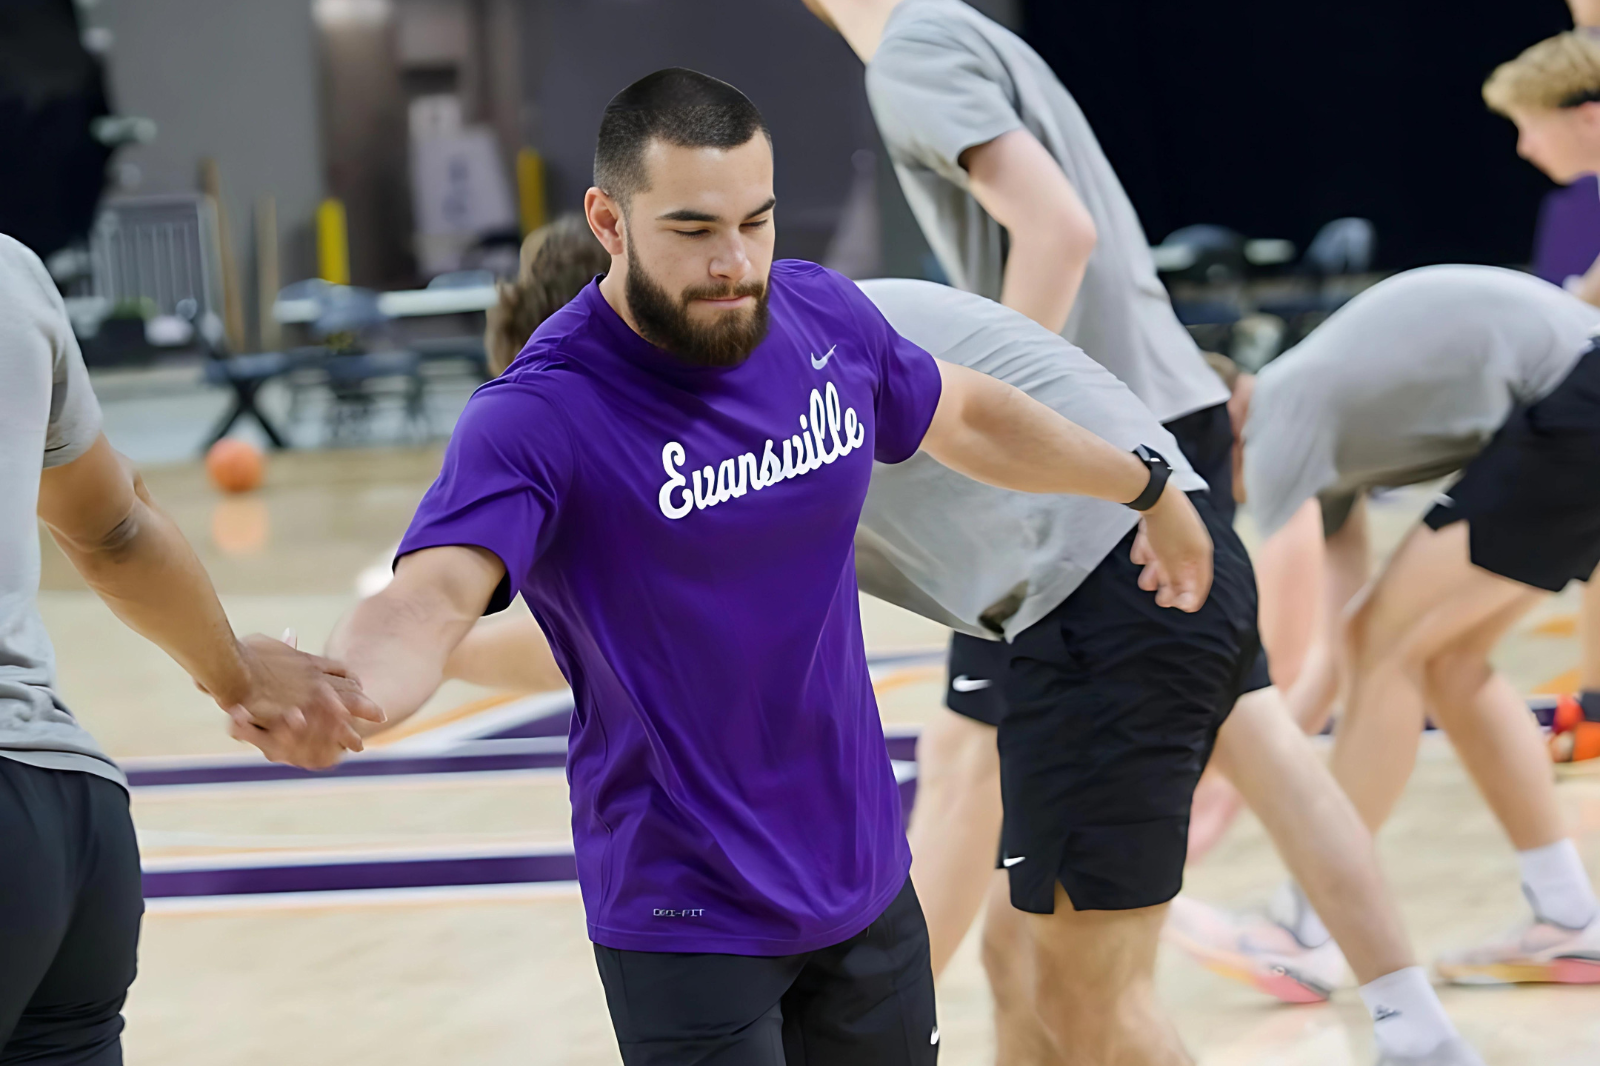 Jeremy Portillo is the sports performance coach for Evansville University men’s basketball team.